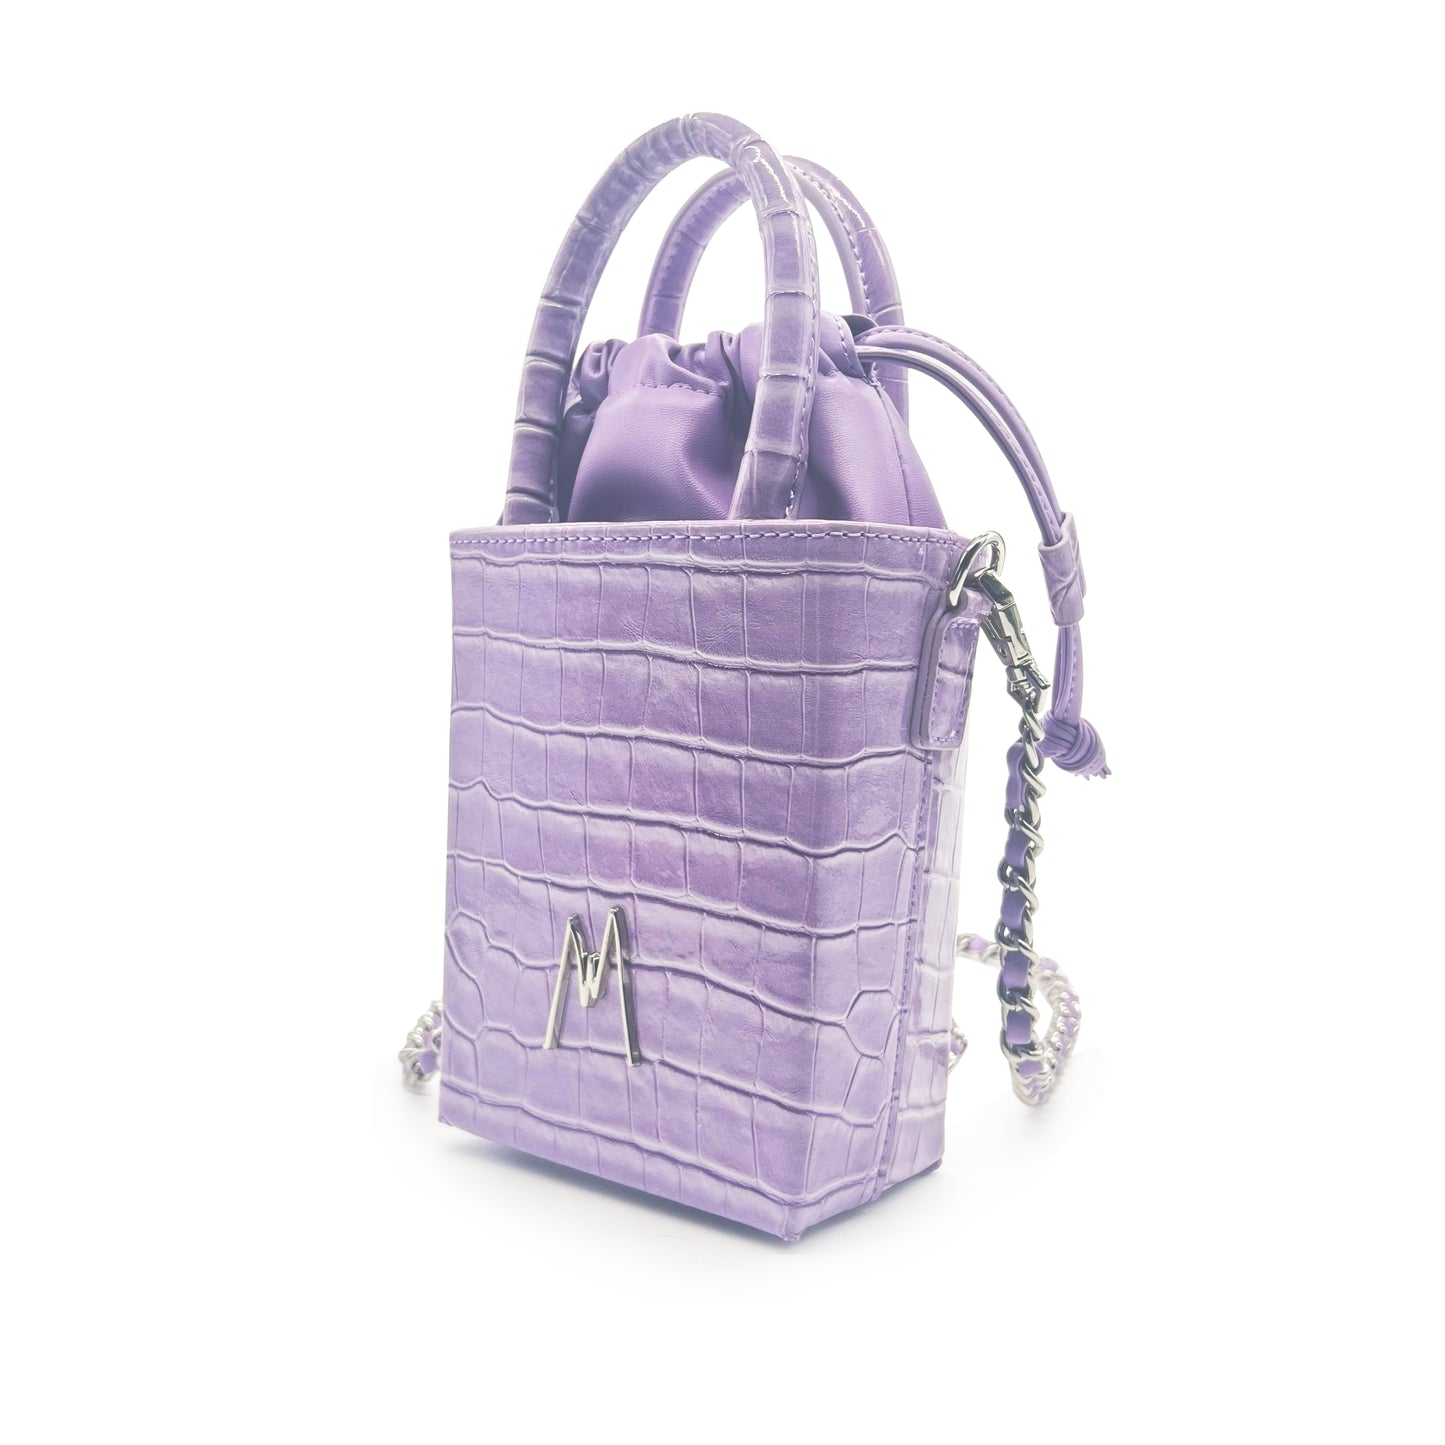 "SMALL LEATHER TOTE"  CROCODILE EMBOSSED - LILAC